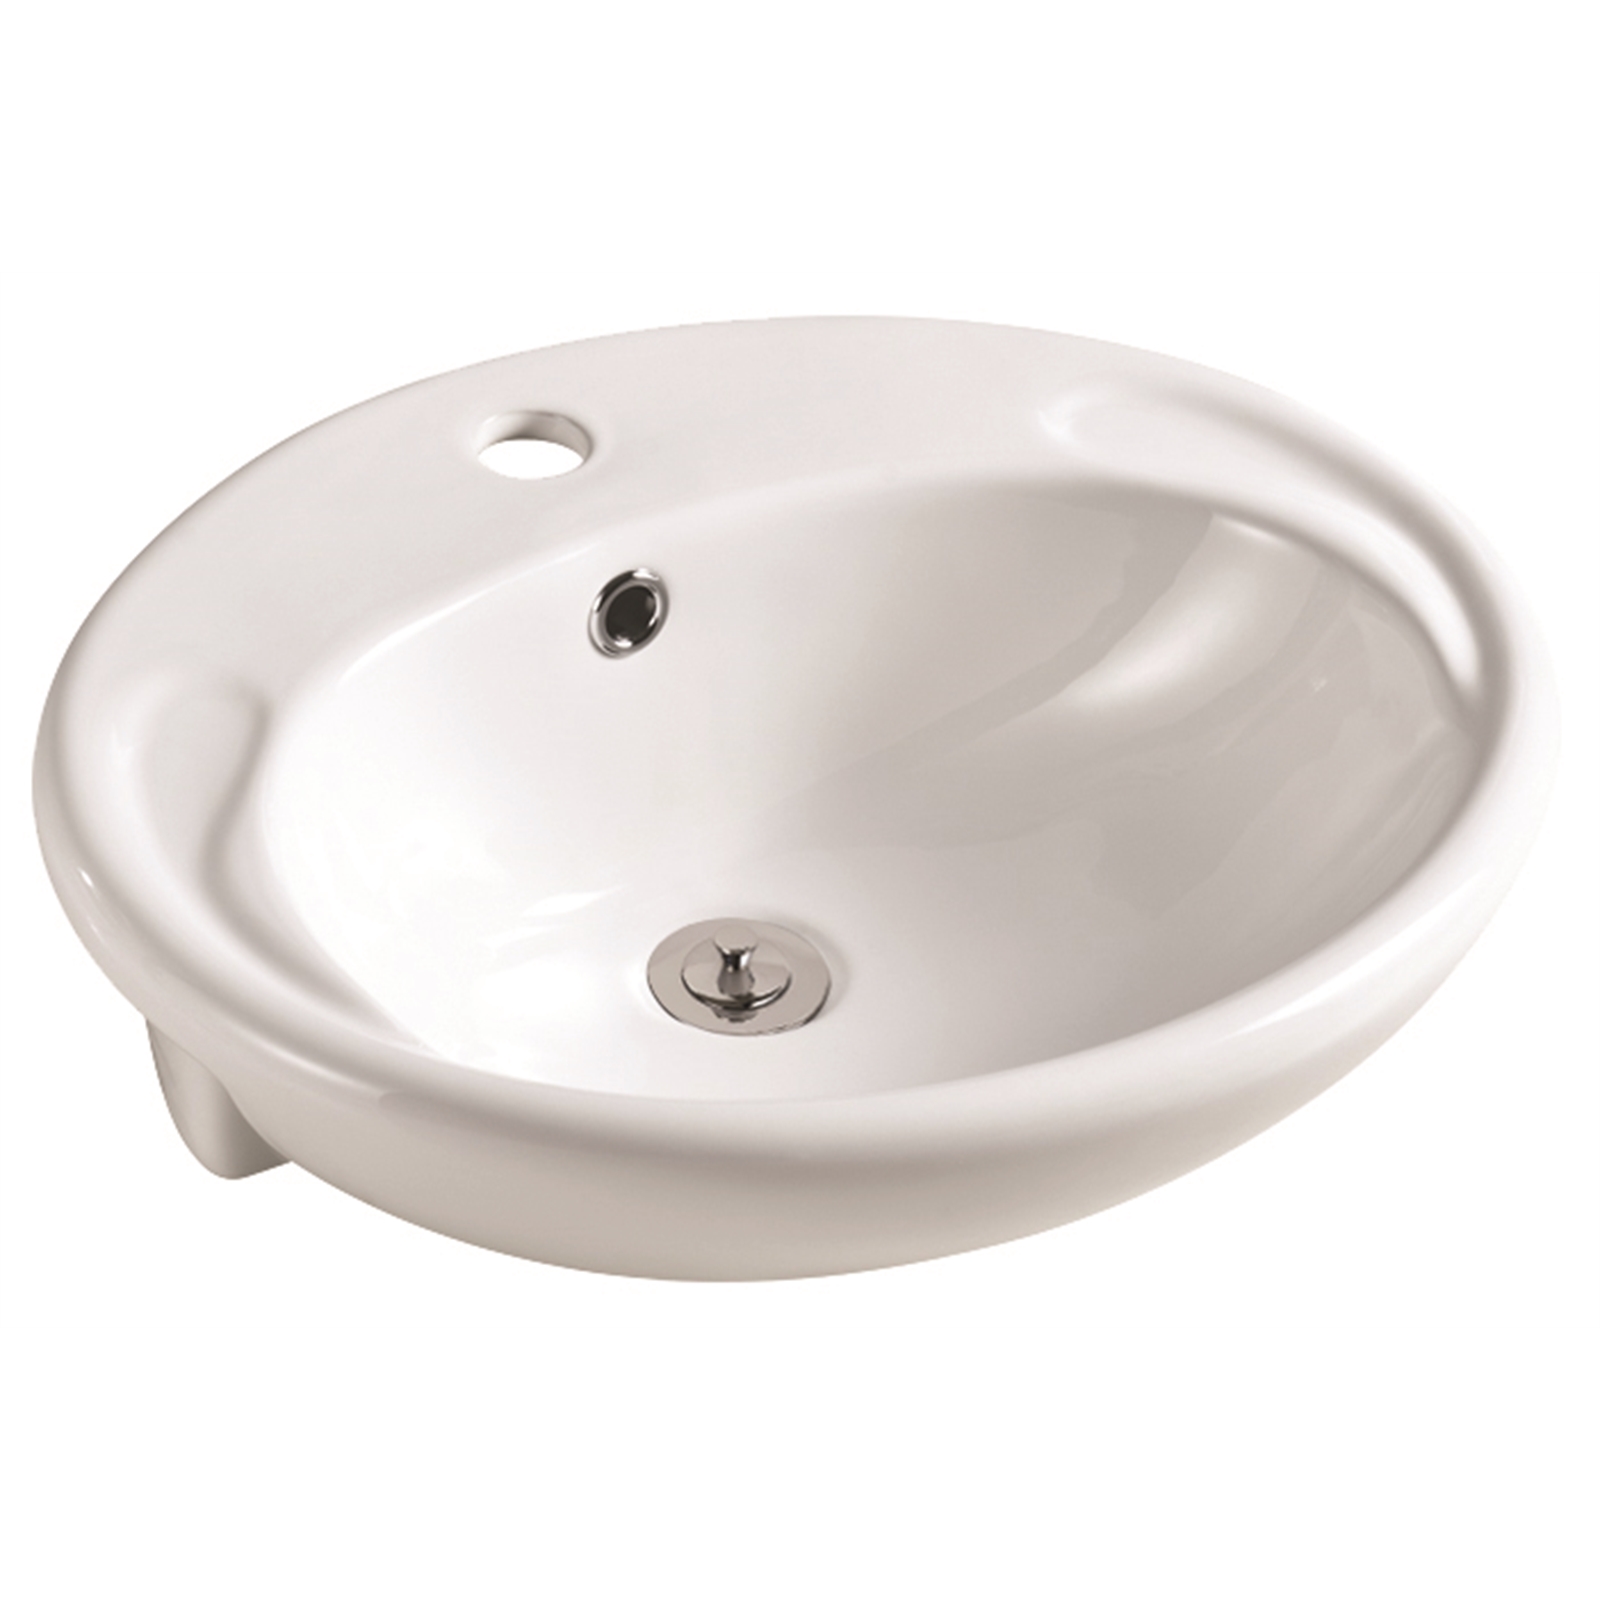 Everhard 1TH Virtue Oval Semi Recessed Basin with Chrome Plug and Waste